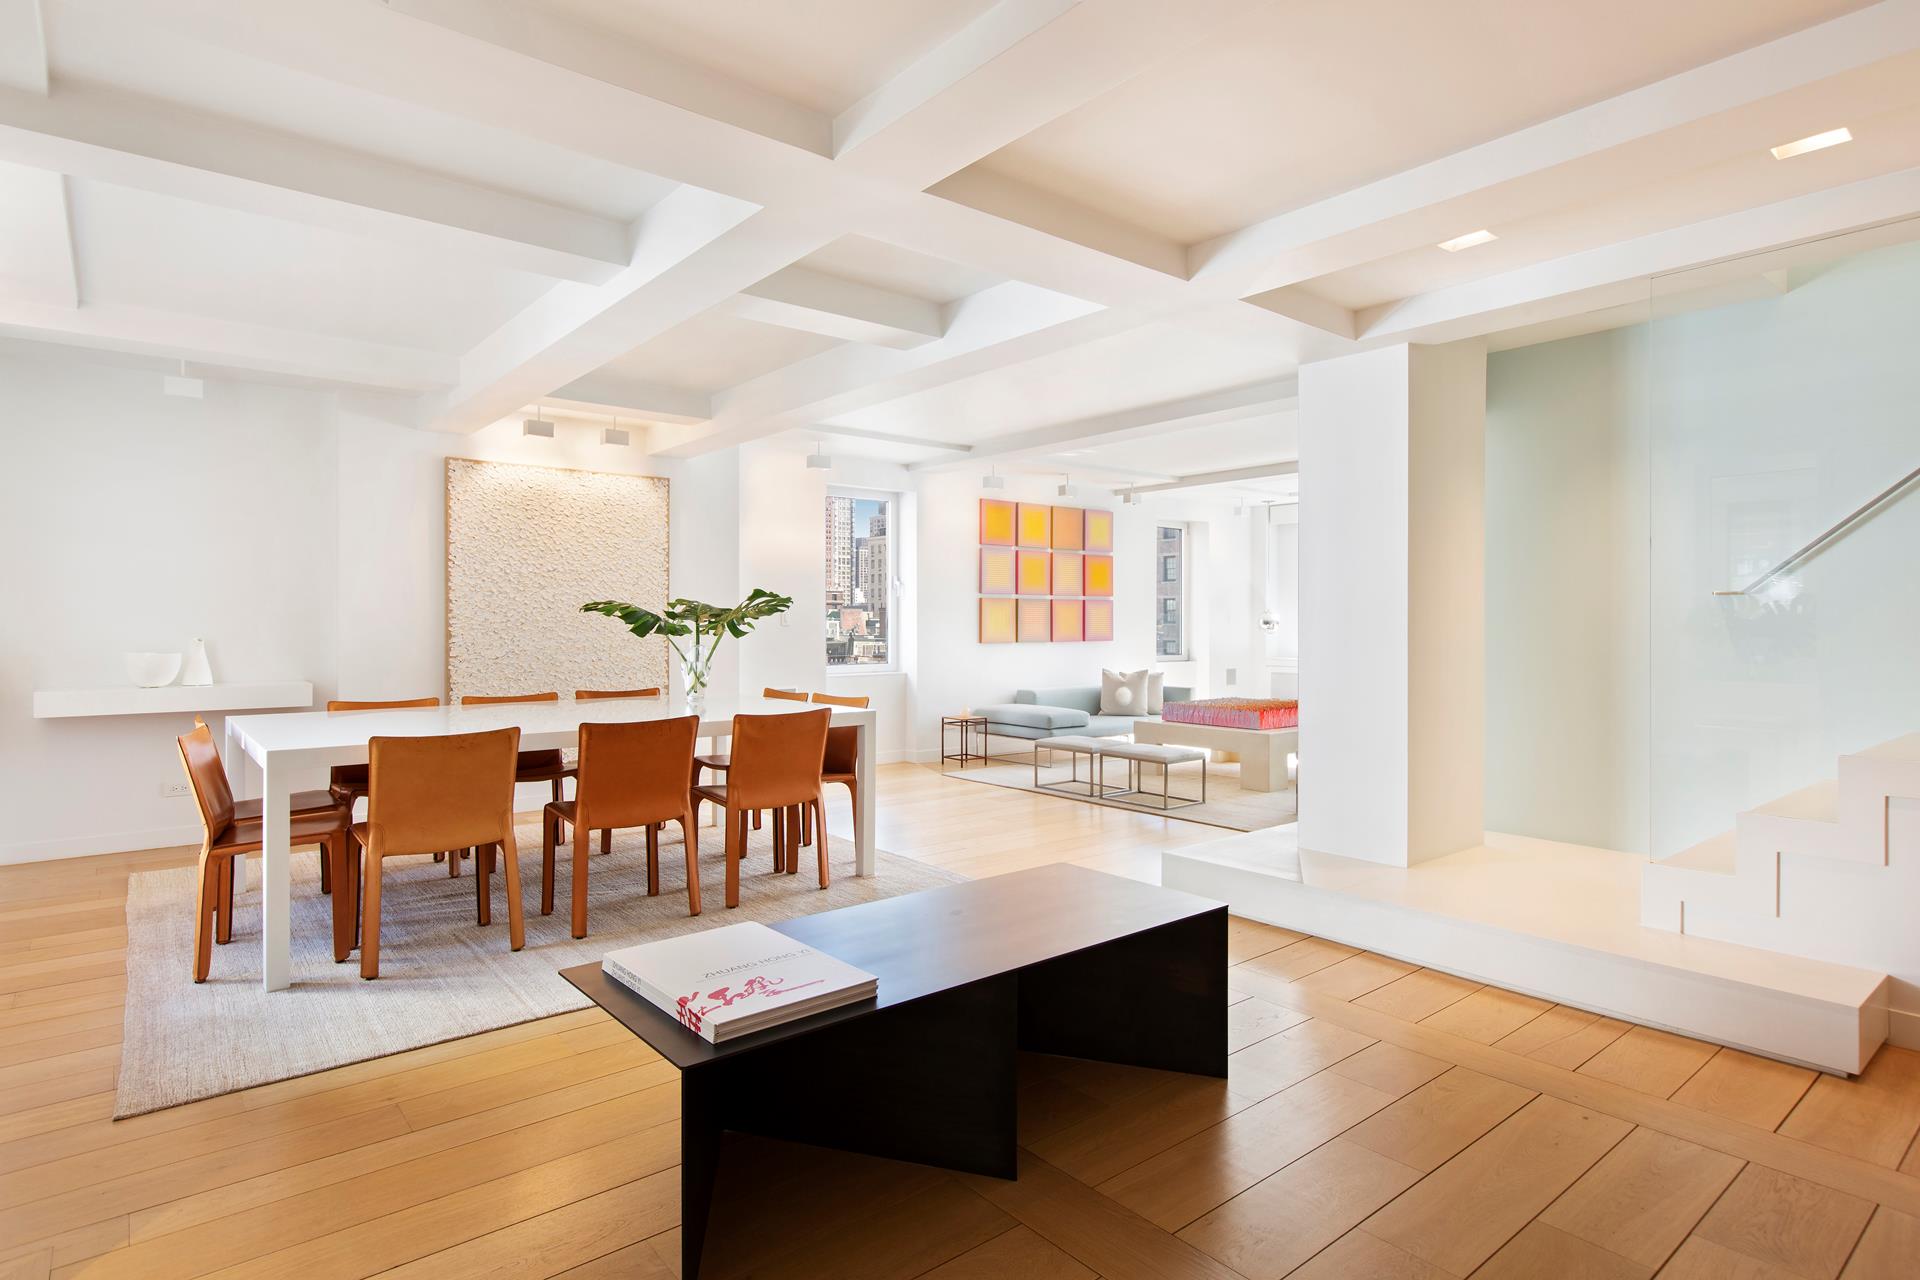 3 East 69th Street 9/10A, Lenox Hill, Upper East Side, NYC - 4 Bedrooms  
4 Bathrooms  
9 Rooms - 